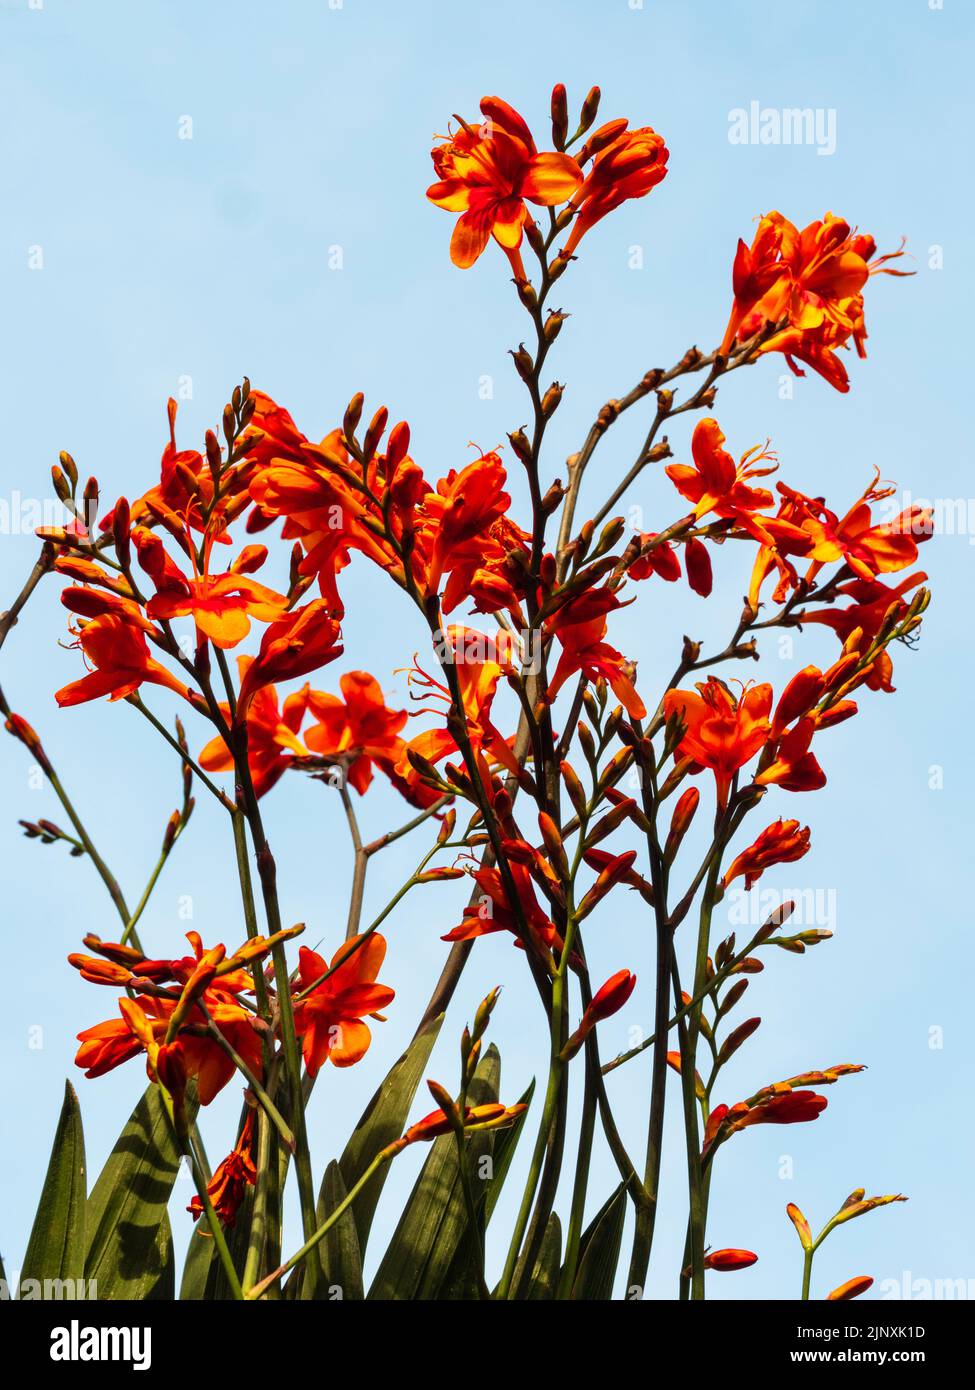 Red throated orange flowers of the hardy, later summer blooming upright perennial, Crocosmia 'Walberton's Bright Eyes' Stock Photo